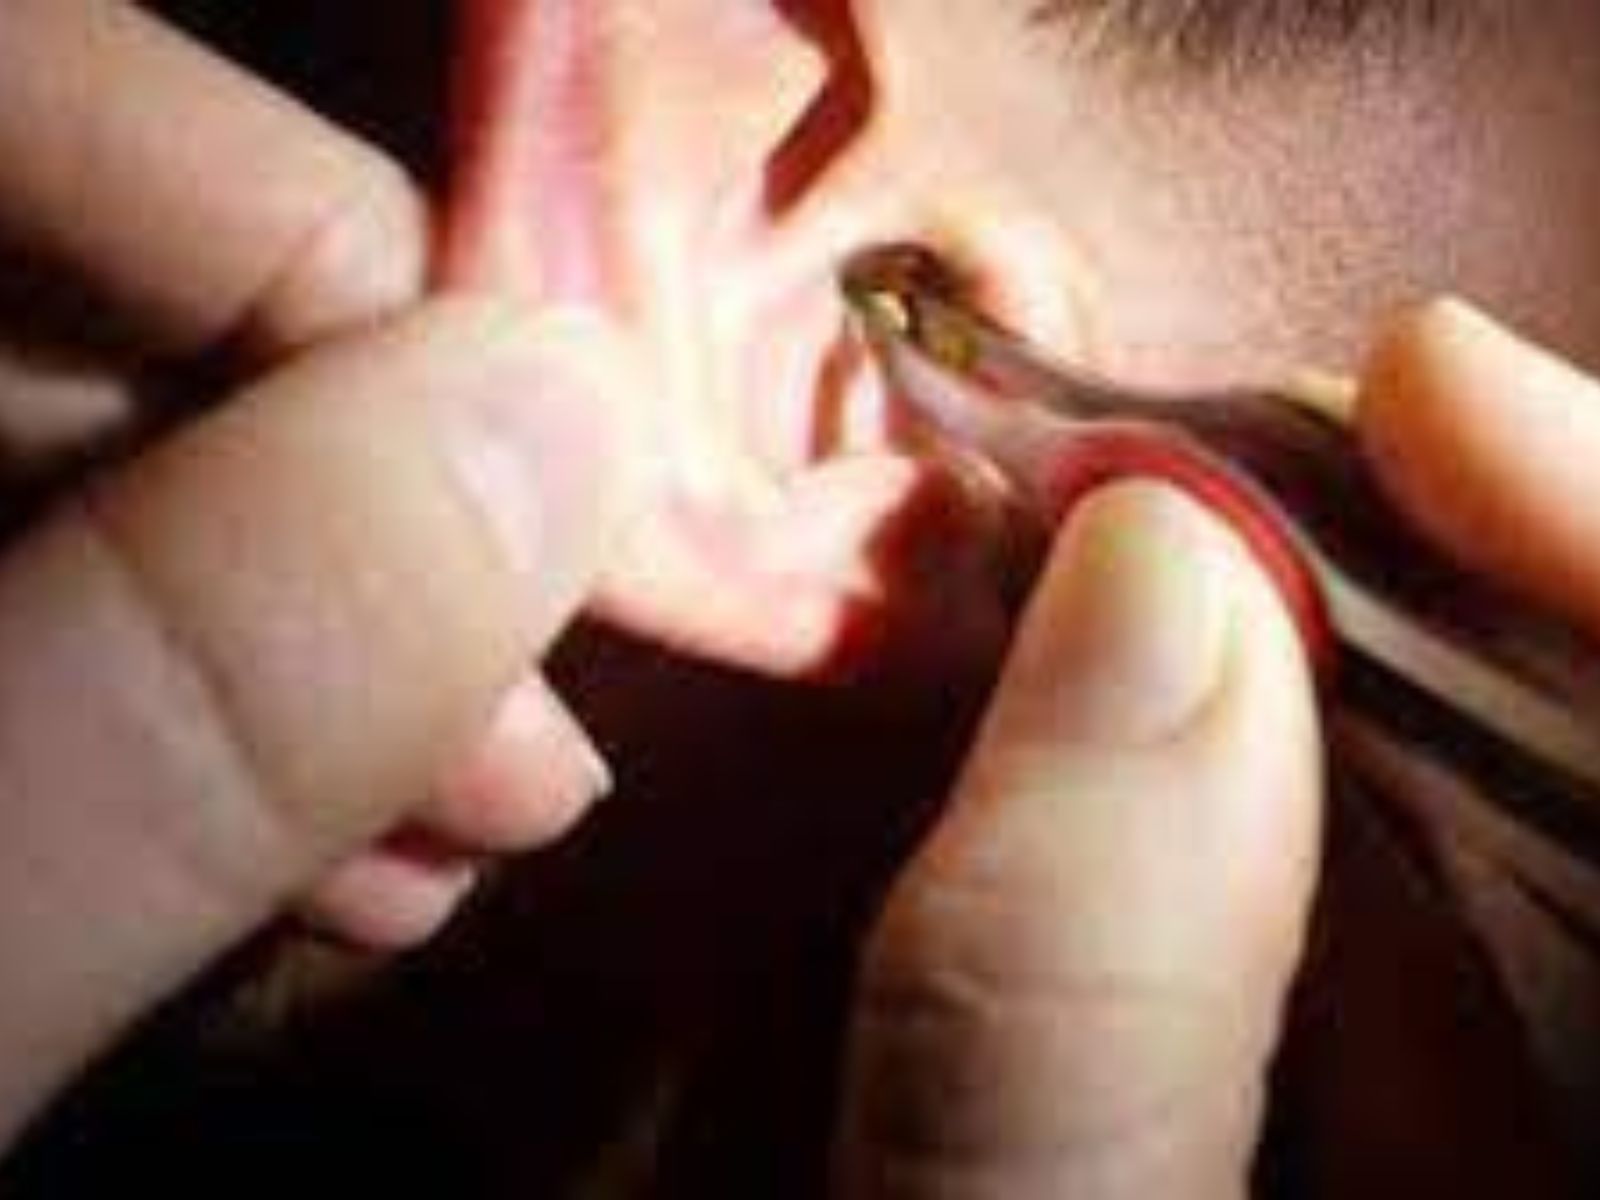 Manual Ear Wax removal for patient from Broxtowe